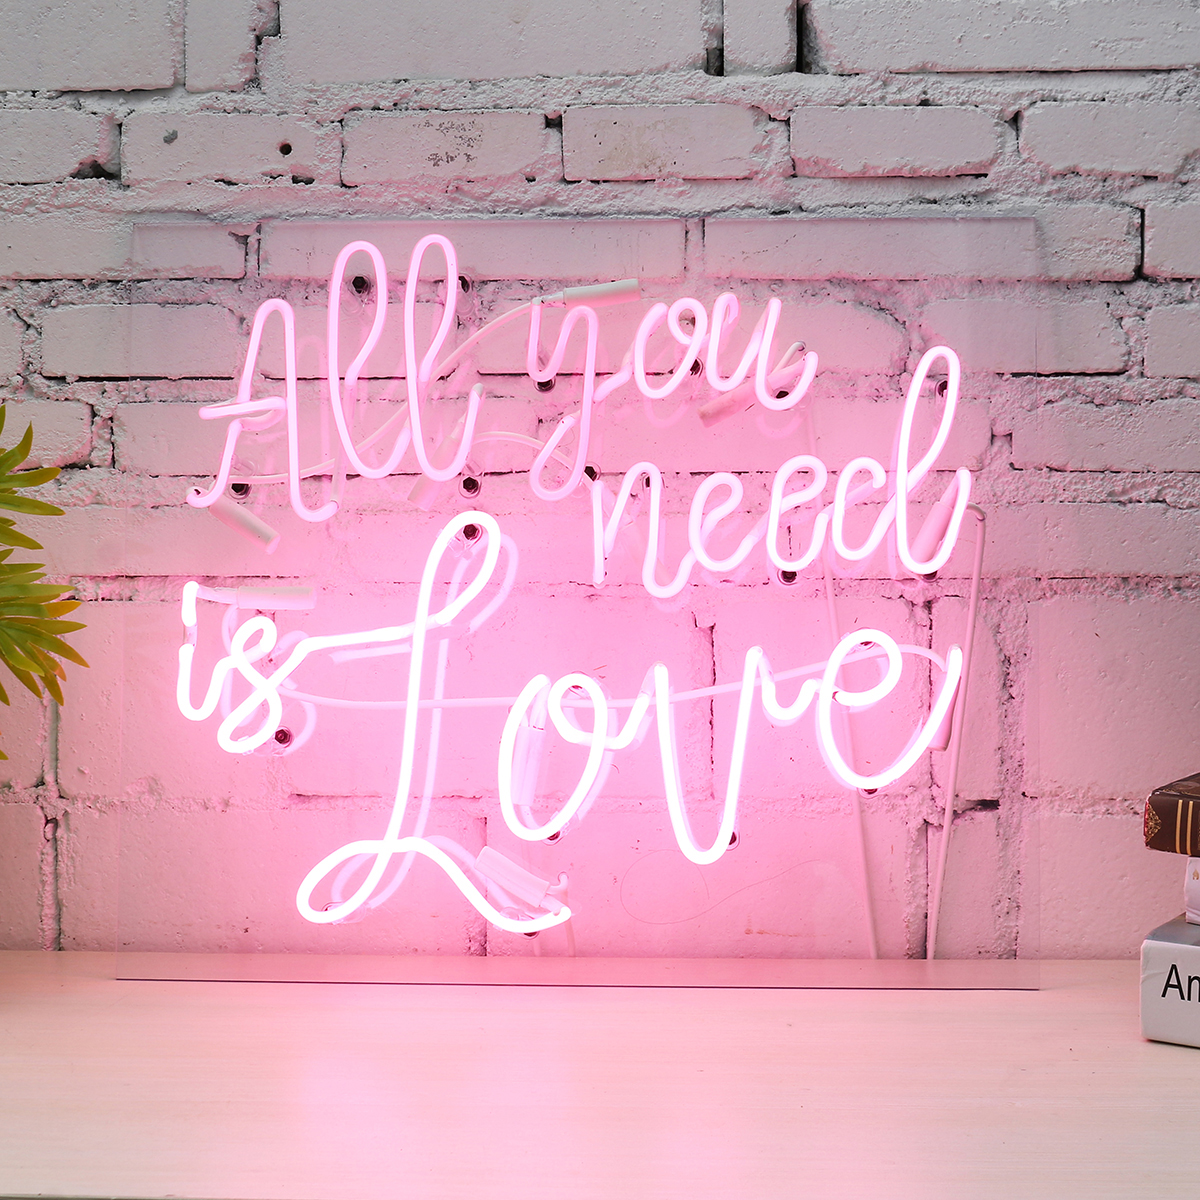 All-You-Need-Is-Love-Neon-Sign-For-Bedroom-Wall-Decor-Artwork-With-Dimmer-Decorations-1557205-1